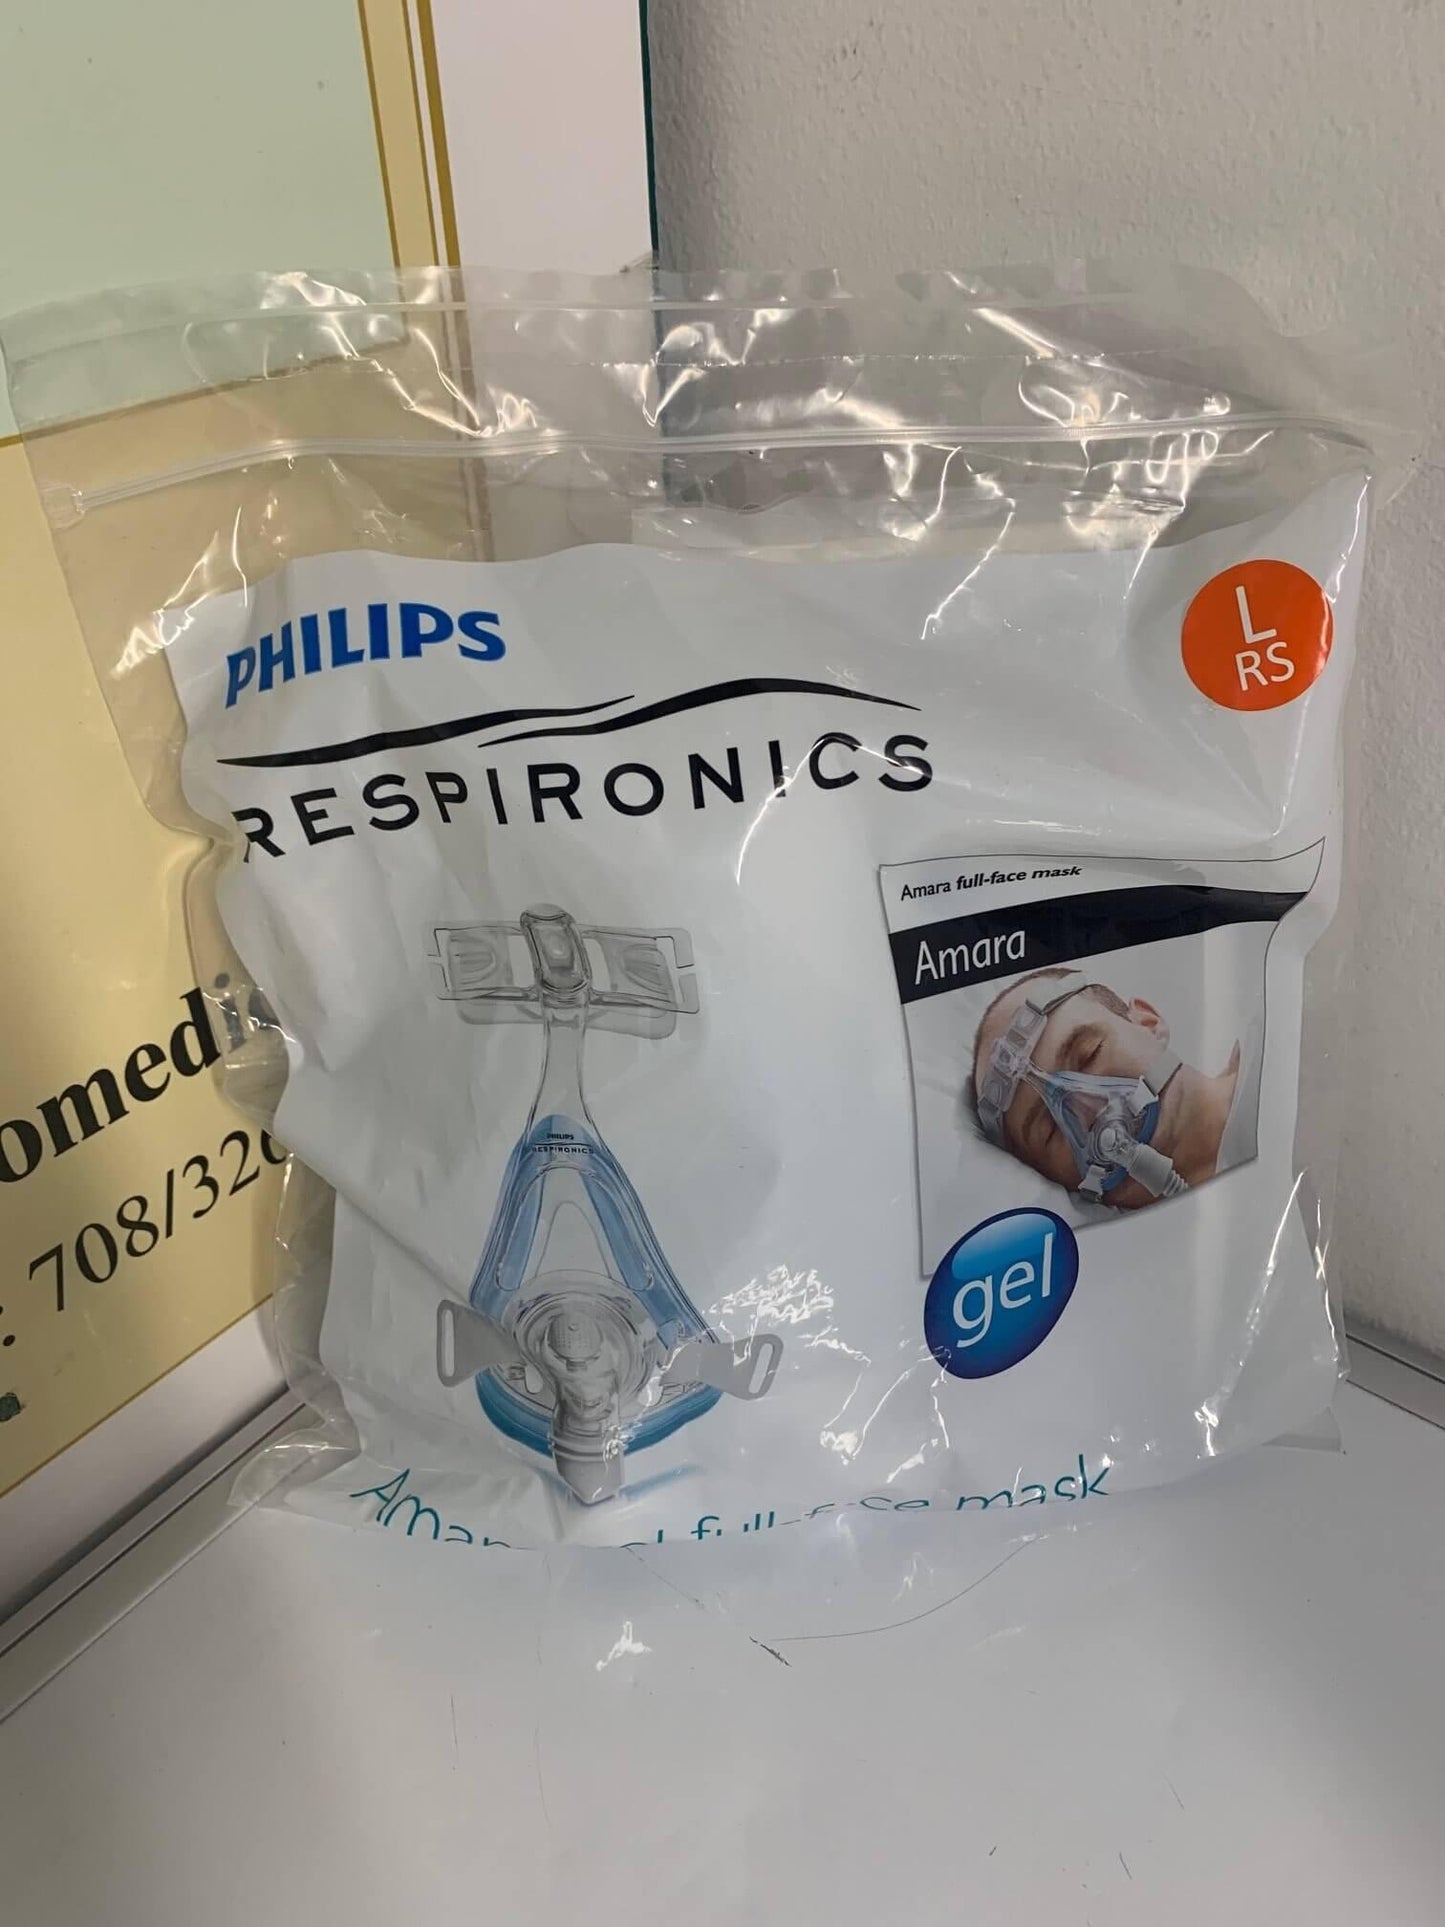 NEW Philips Respironics Amara Gel full face mask with RS frame and standard headgear L 1090426 Large Size - MBR Medicals